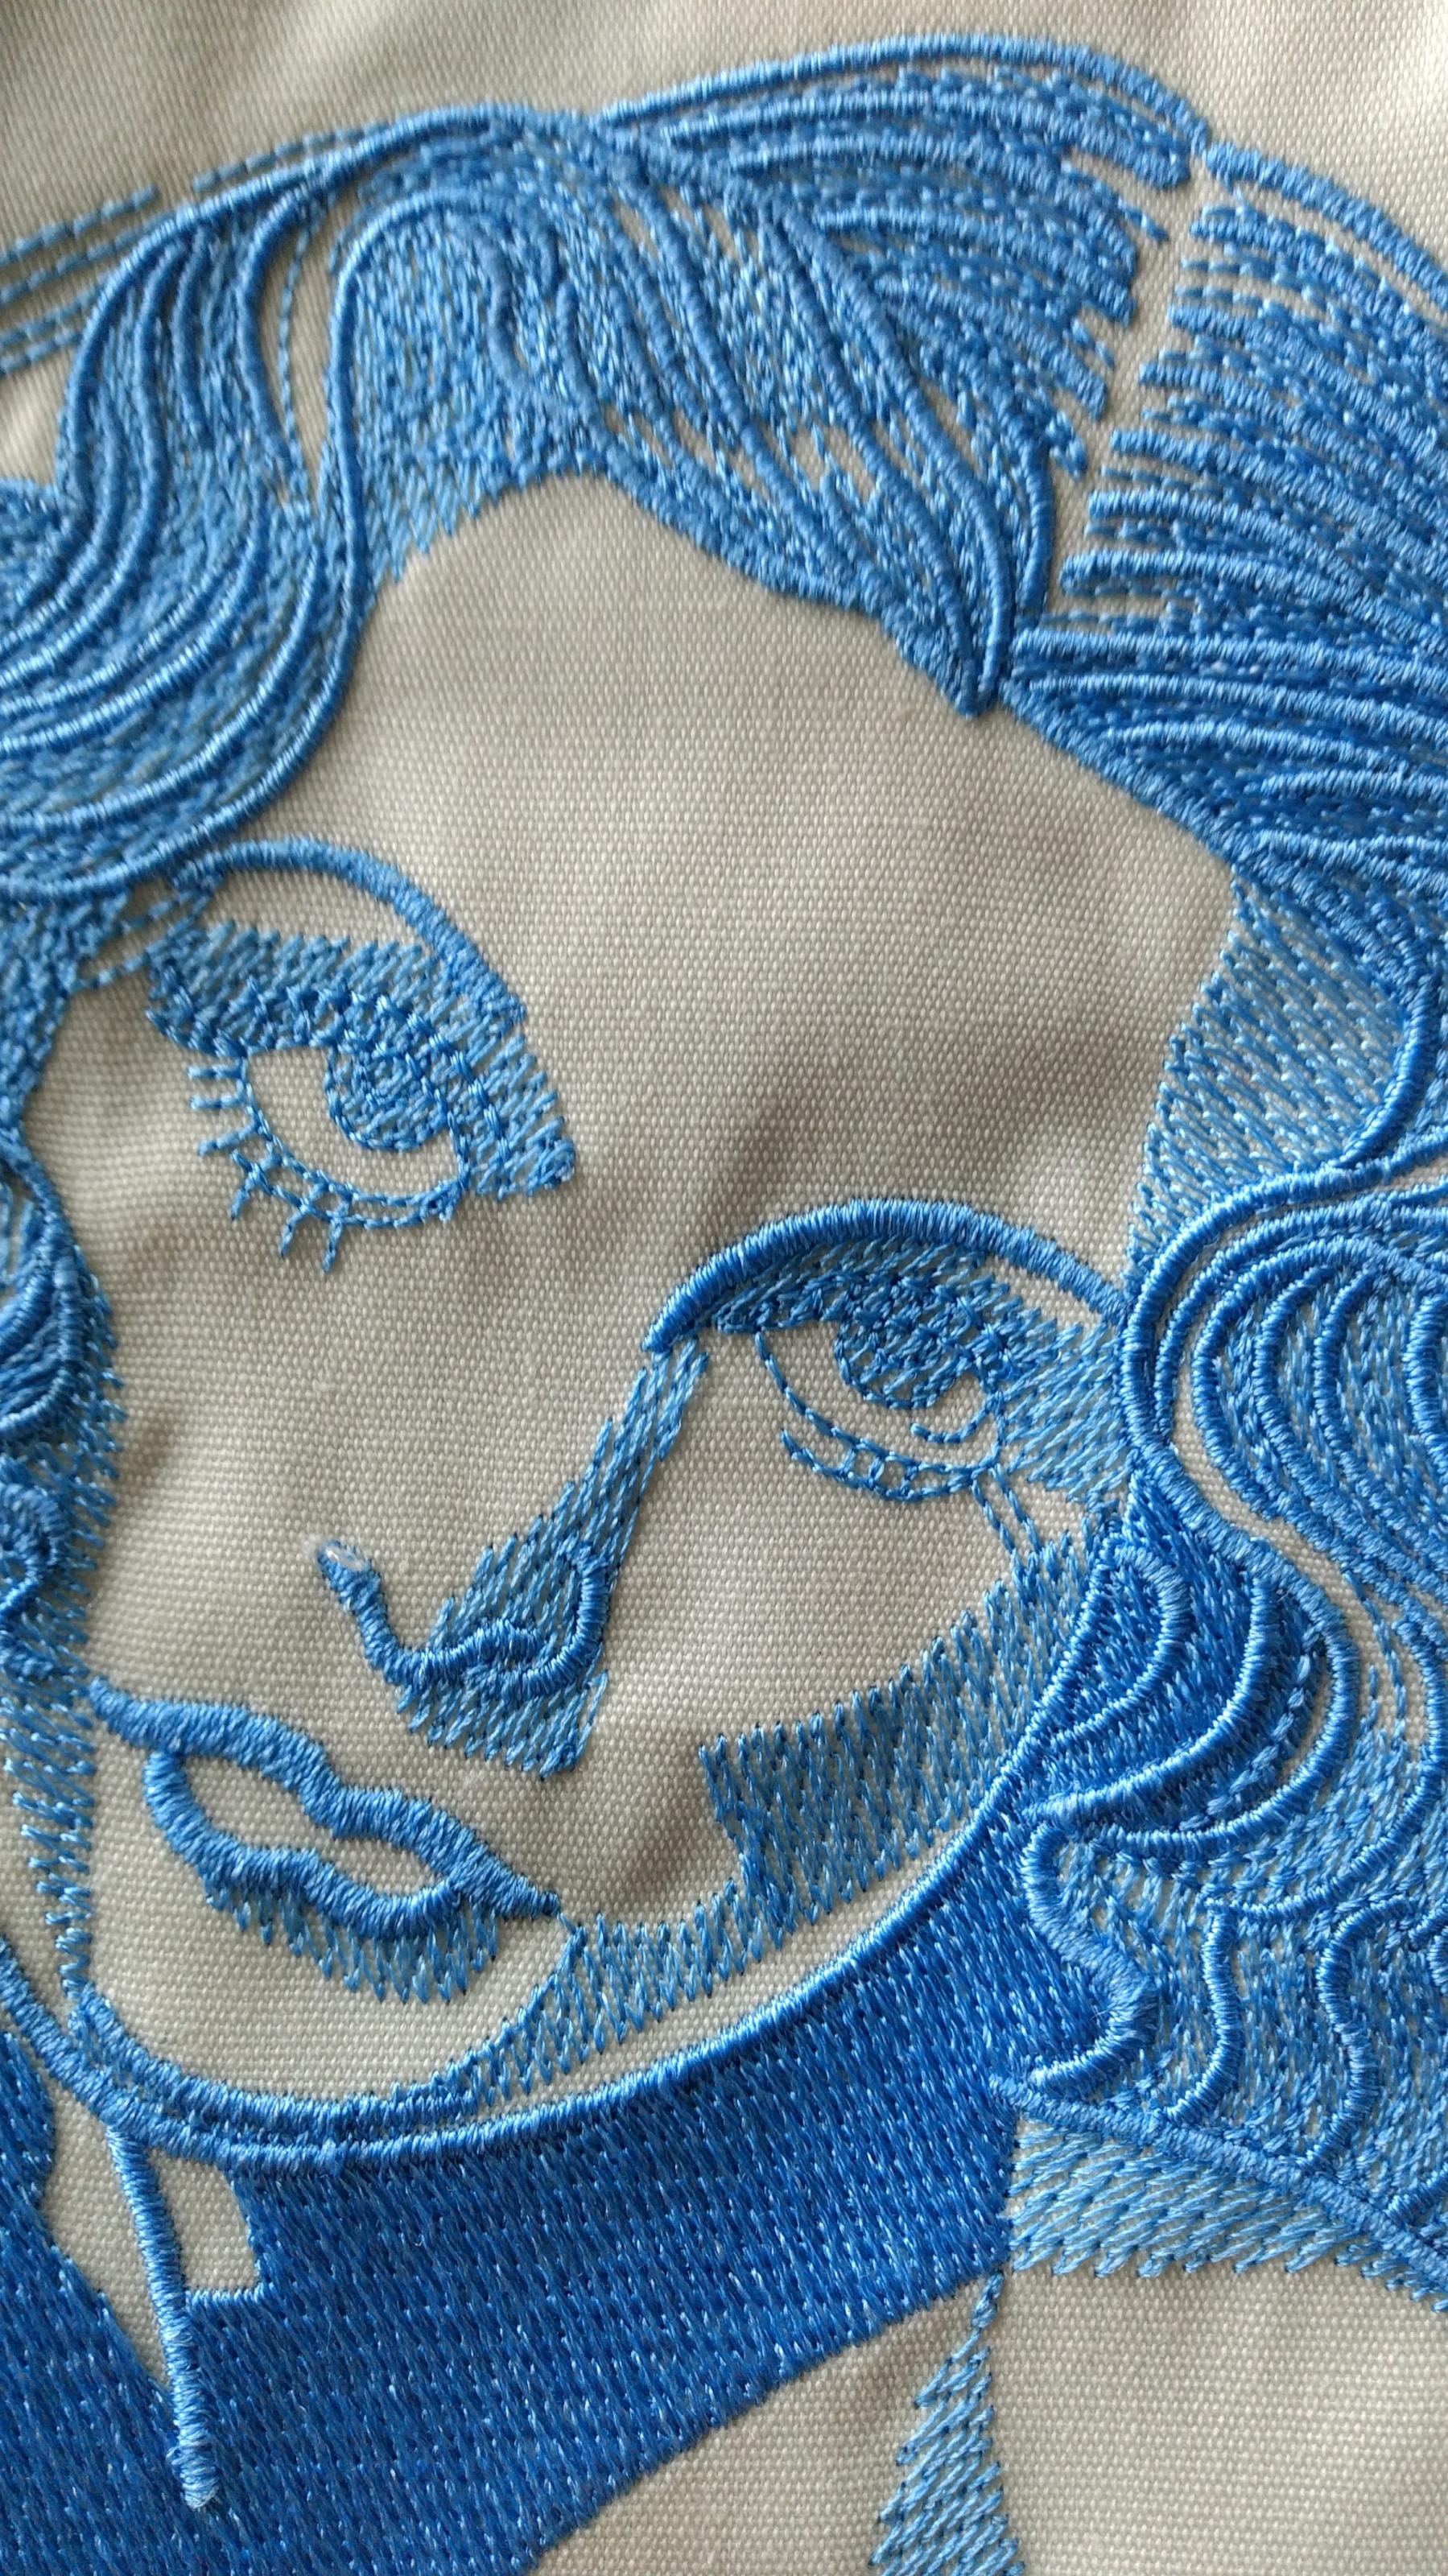 Face of woman with flower embroidery design